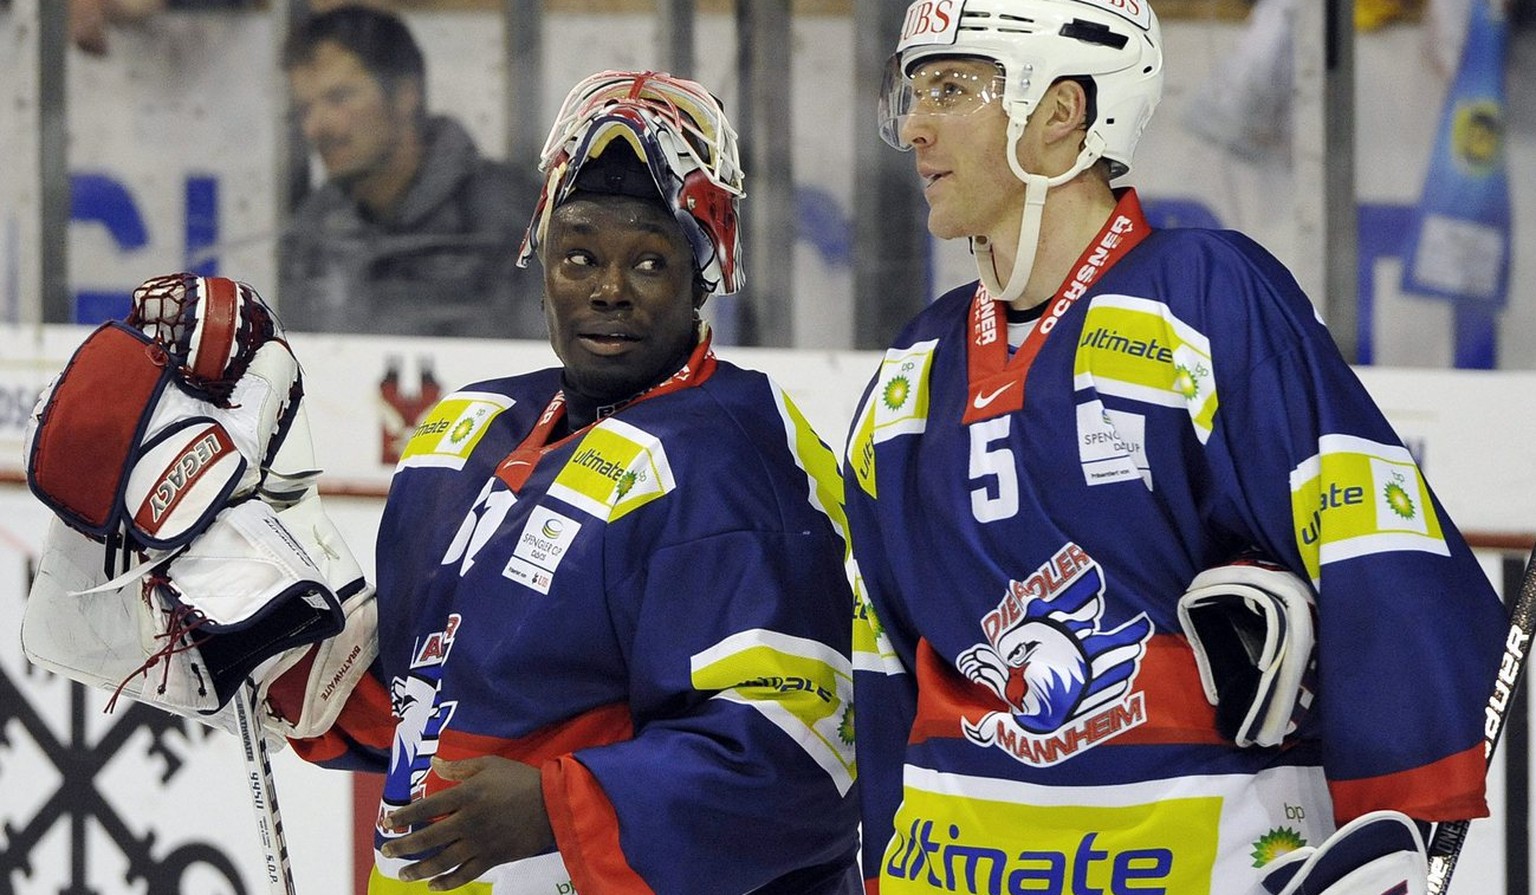 Mannheim&#039;s goalkeeper Fred Brathwaite, left, talks with his teammate Andy Hedlund during the game between Germany team Adler Mannheim and team Canada at the 83rd Spengler Cup ice hockey tournamen ...